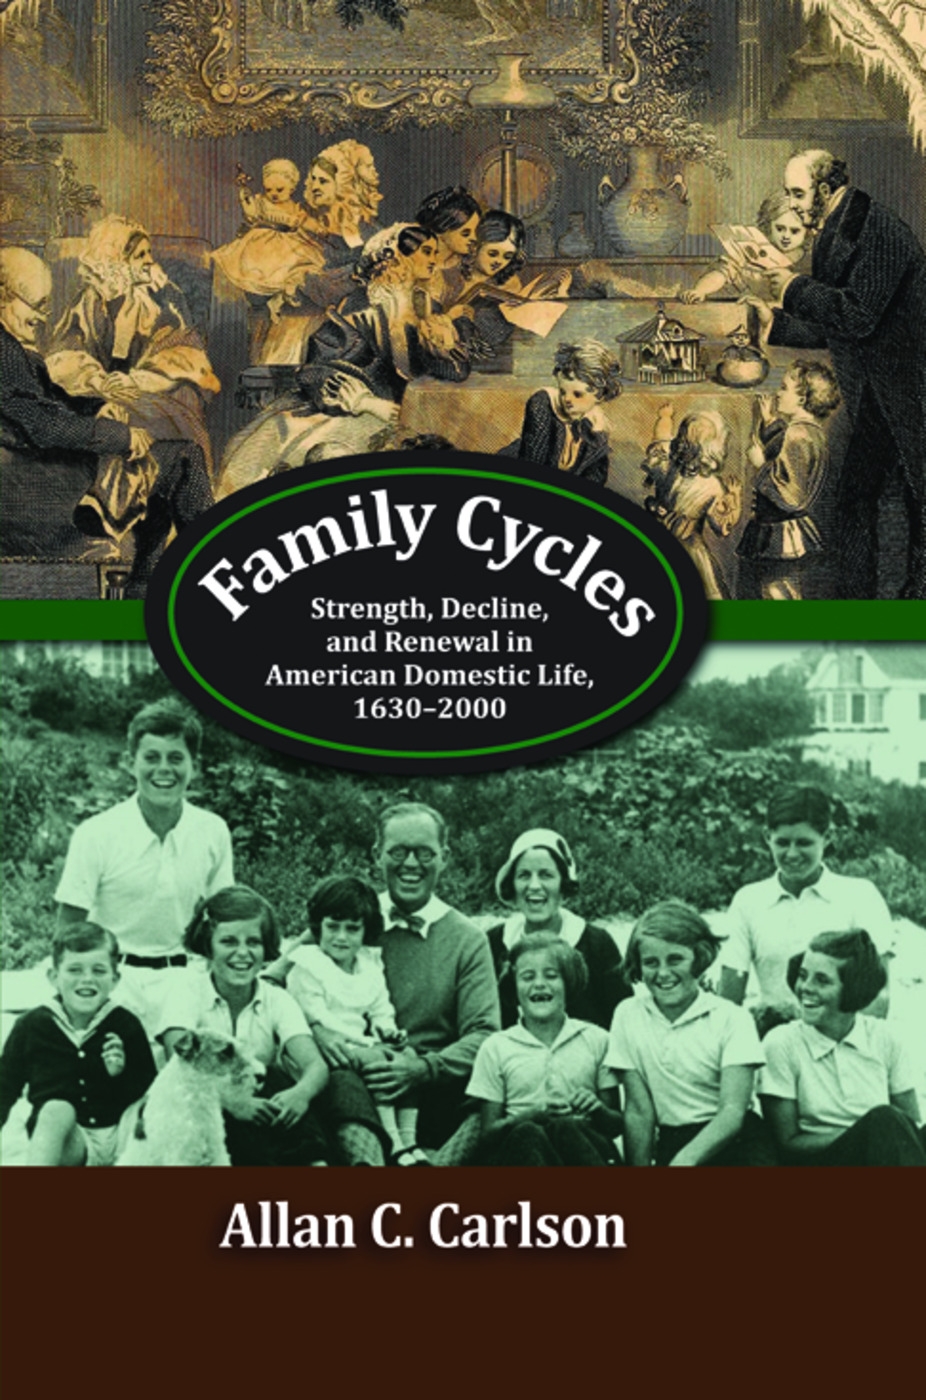 Family Cycles: Strength, Decline, and Renewal in American Domestic Life, 1630-2000